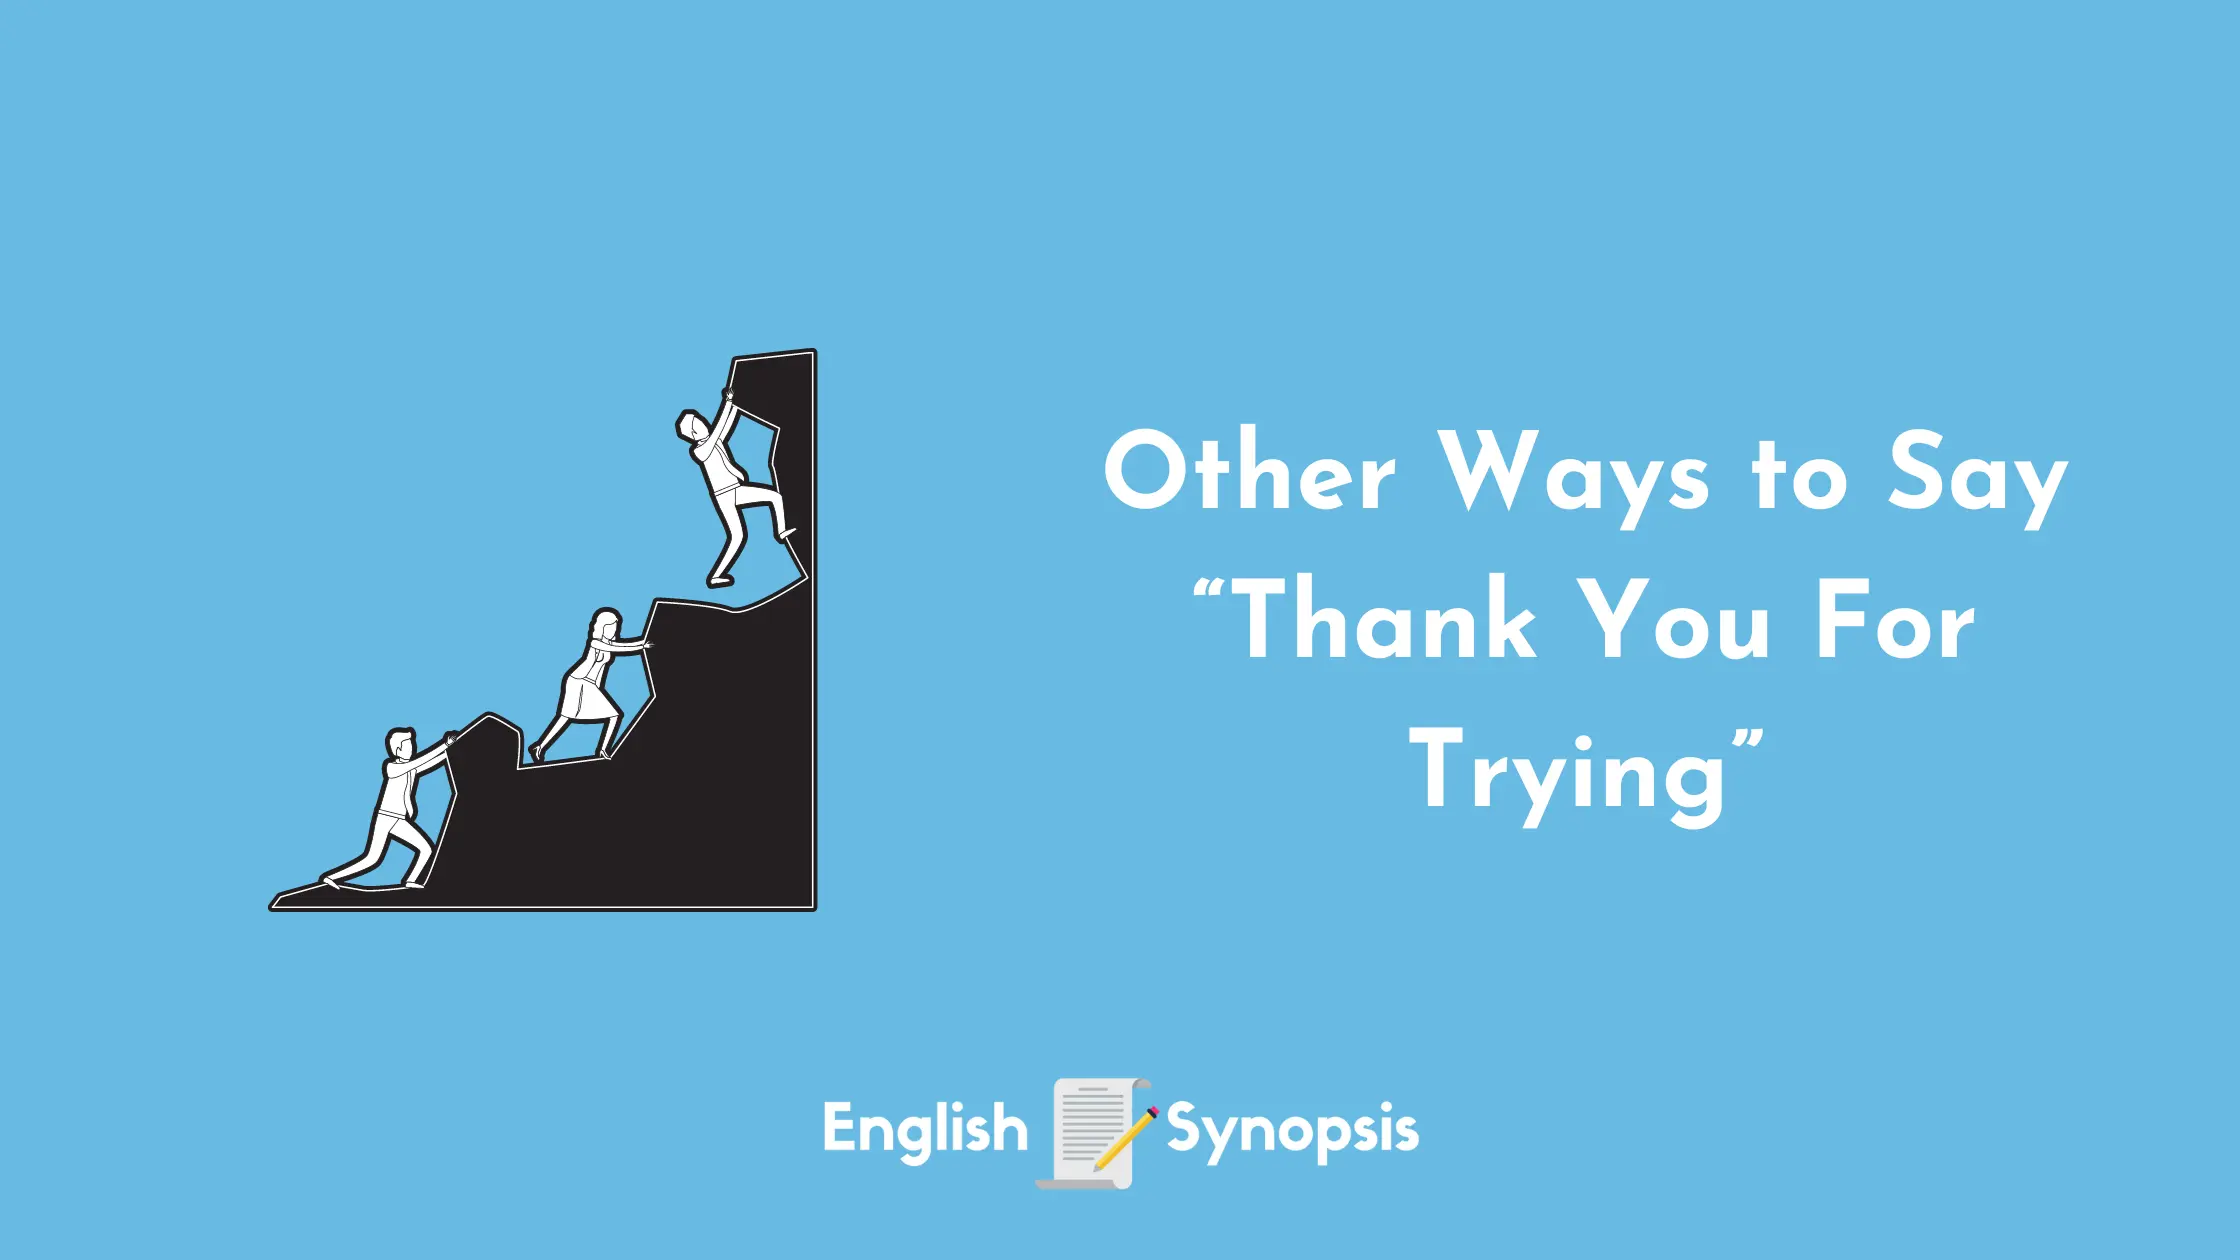 Other Ways To Say "Thank You For Trying"